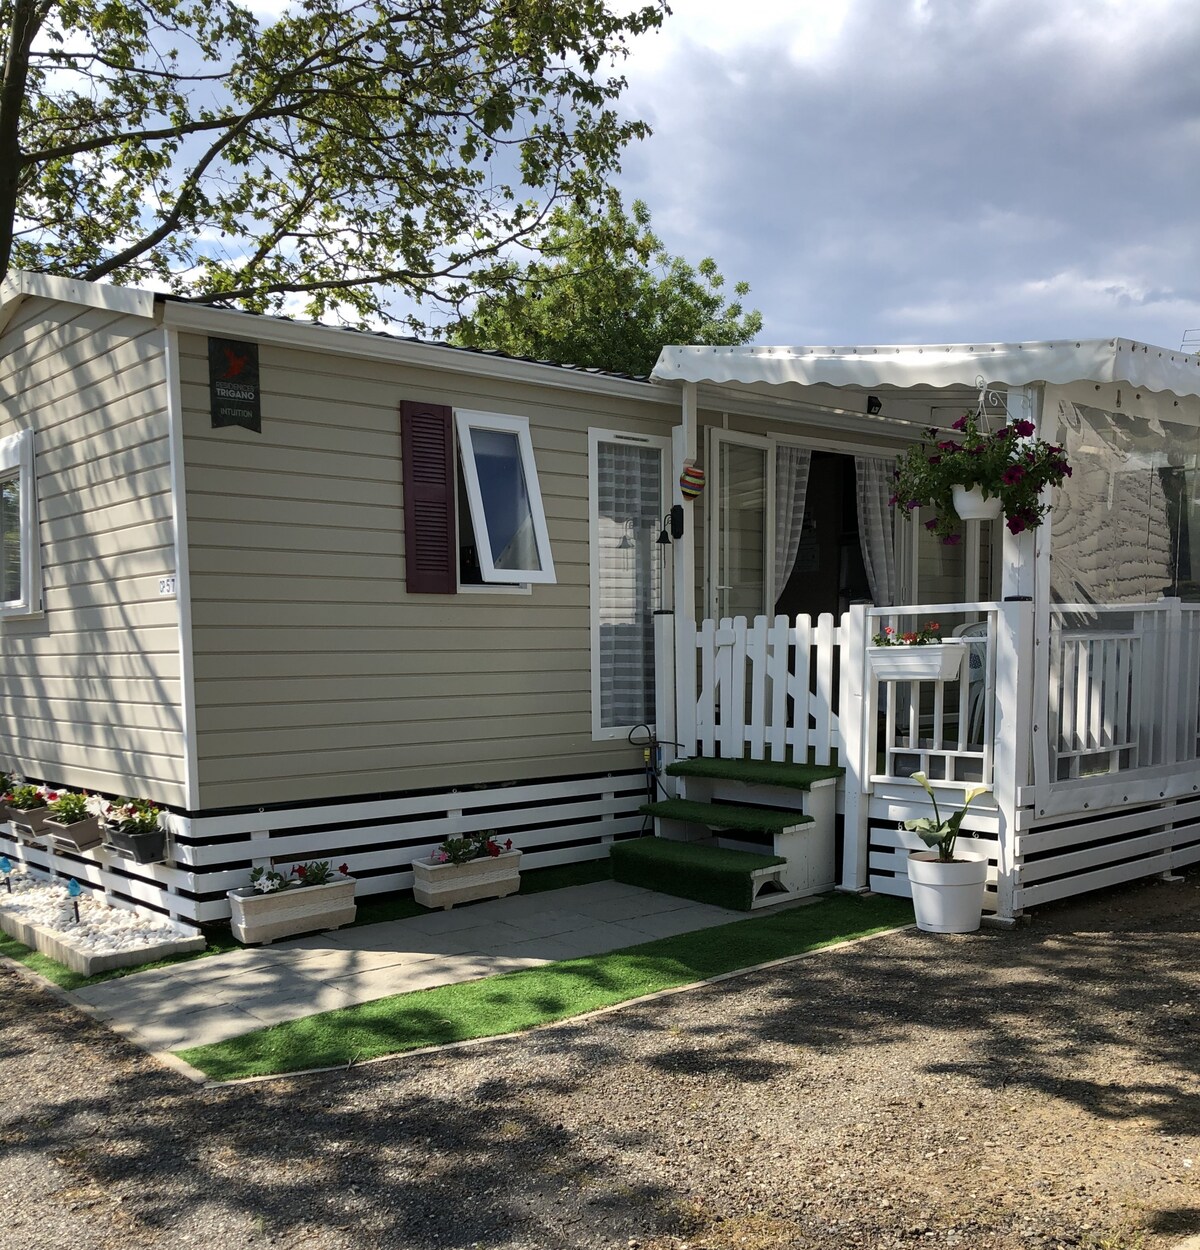 Mobil-home (Clim,Lv,Ll)- Camping Narbonne-Plage 4*